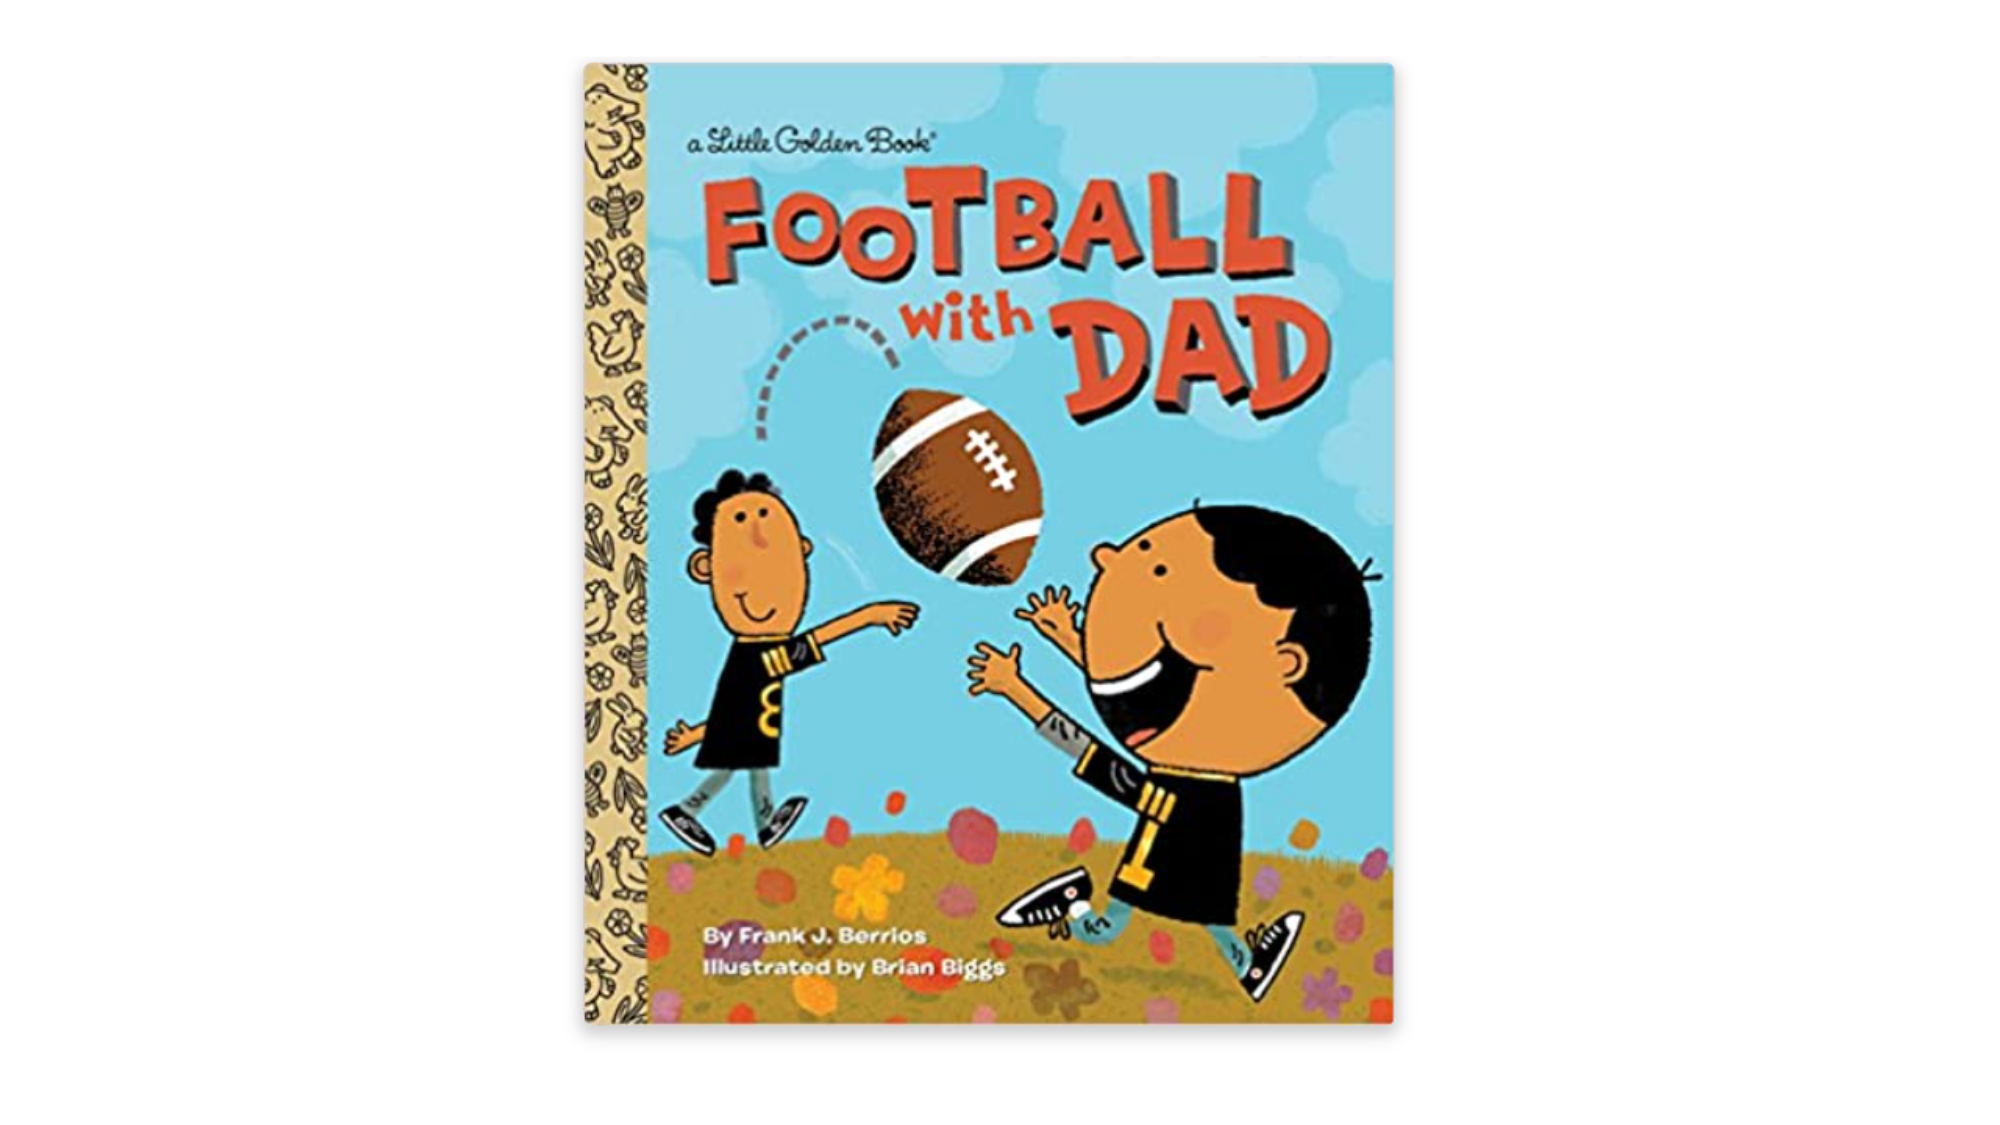 First Super Bowl outfits and toys: A book about bonding